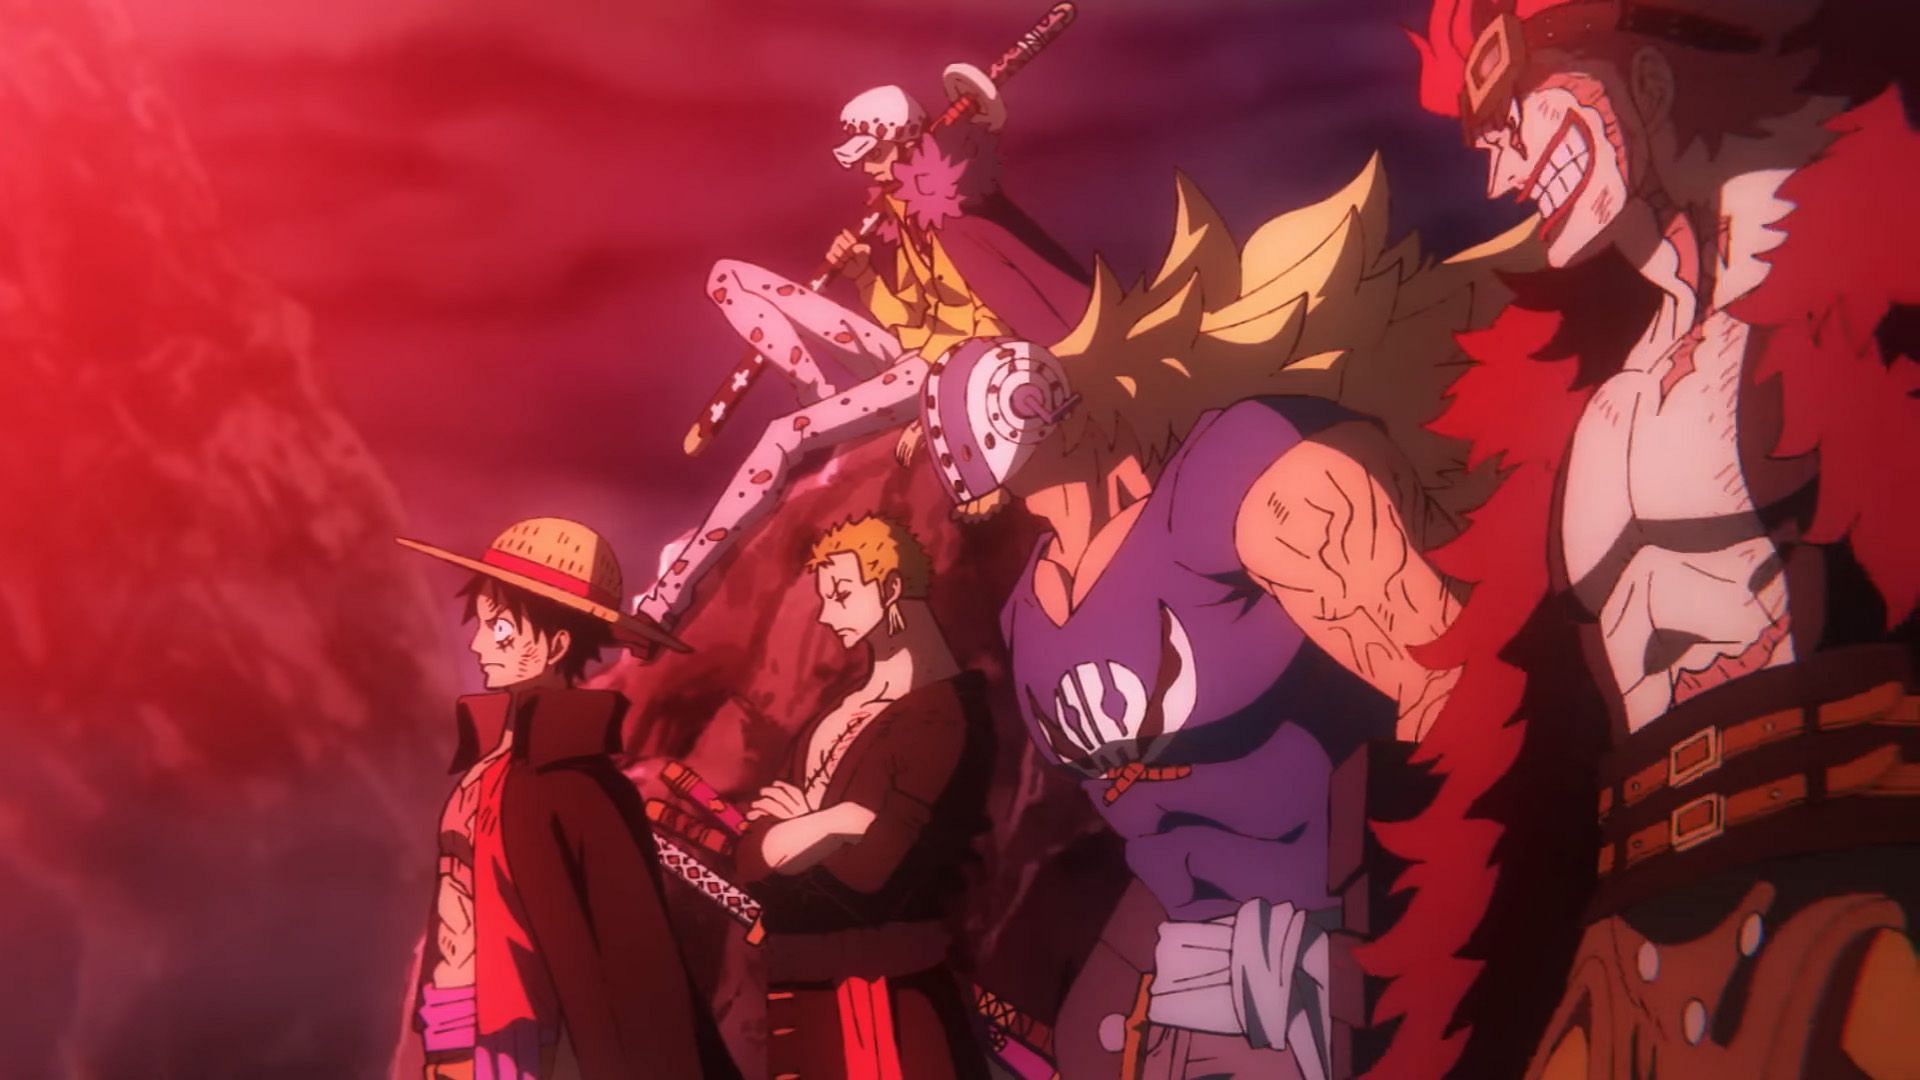 The Worst Generation takes center stage in the highly-anticipated One Piece episode 1015 (Image Credits: Eiichiro Oda/Shueisha, Viz Media, One Piece)